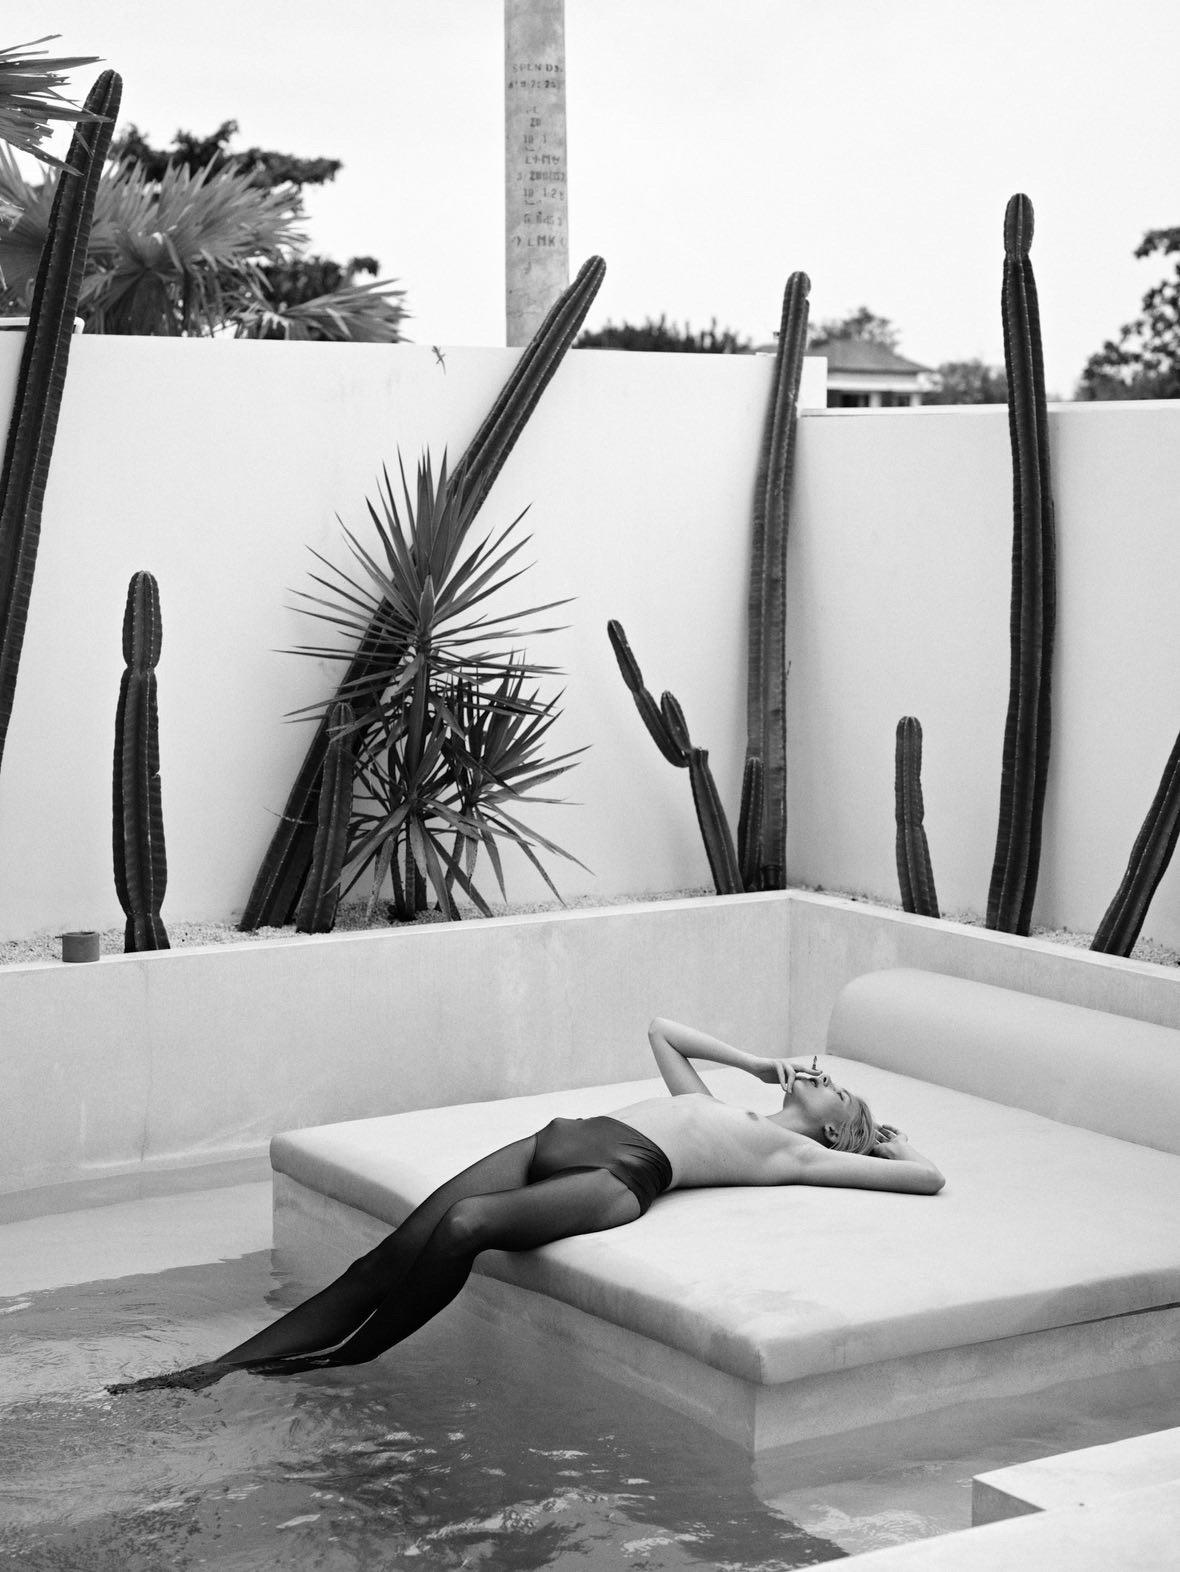 "Pools and Cigarettes" Photography 31.5" x 24" inch Edition of 5 by Lukas Dvorak

Pigment print on Epson Fine ART paper
2023

Ships rolled in a tube 

ABOUT THE ARTIST
Lukas Dvorak is a Czech photographer born in Prague in 1982. His preference goes